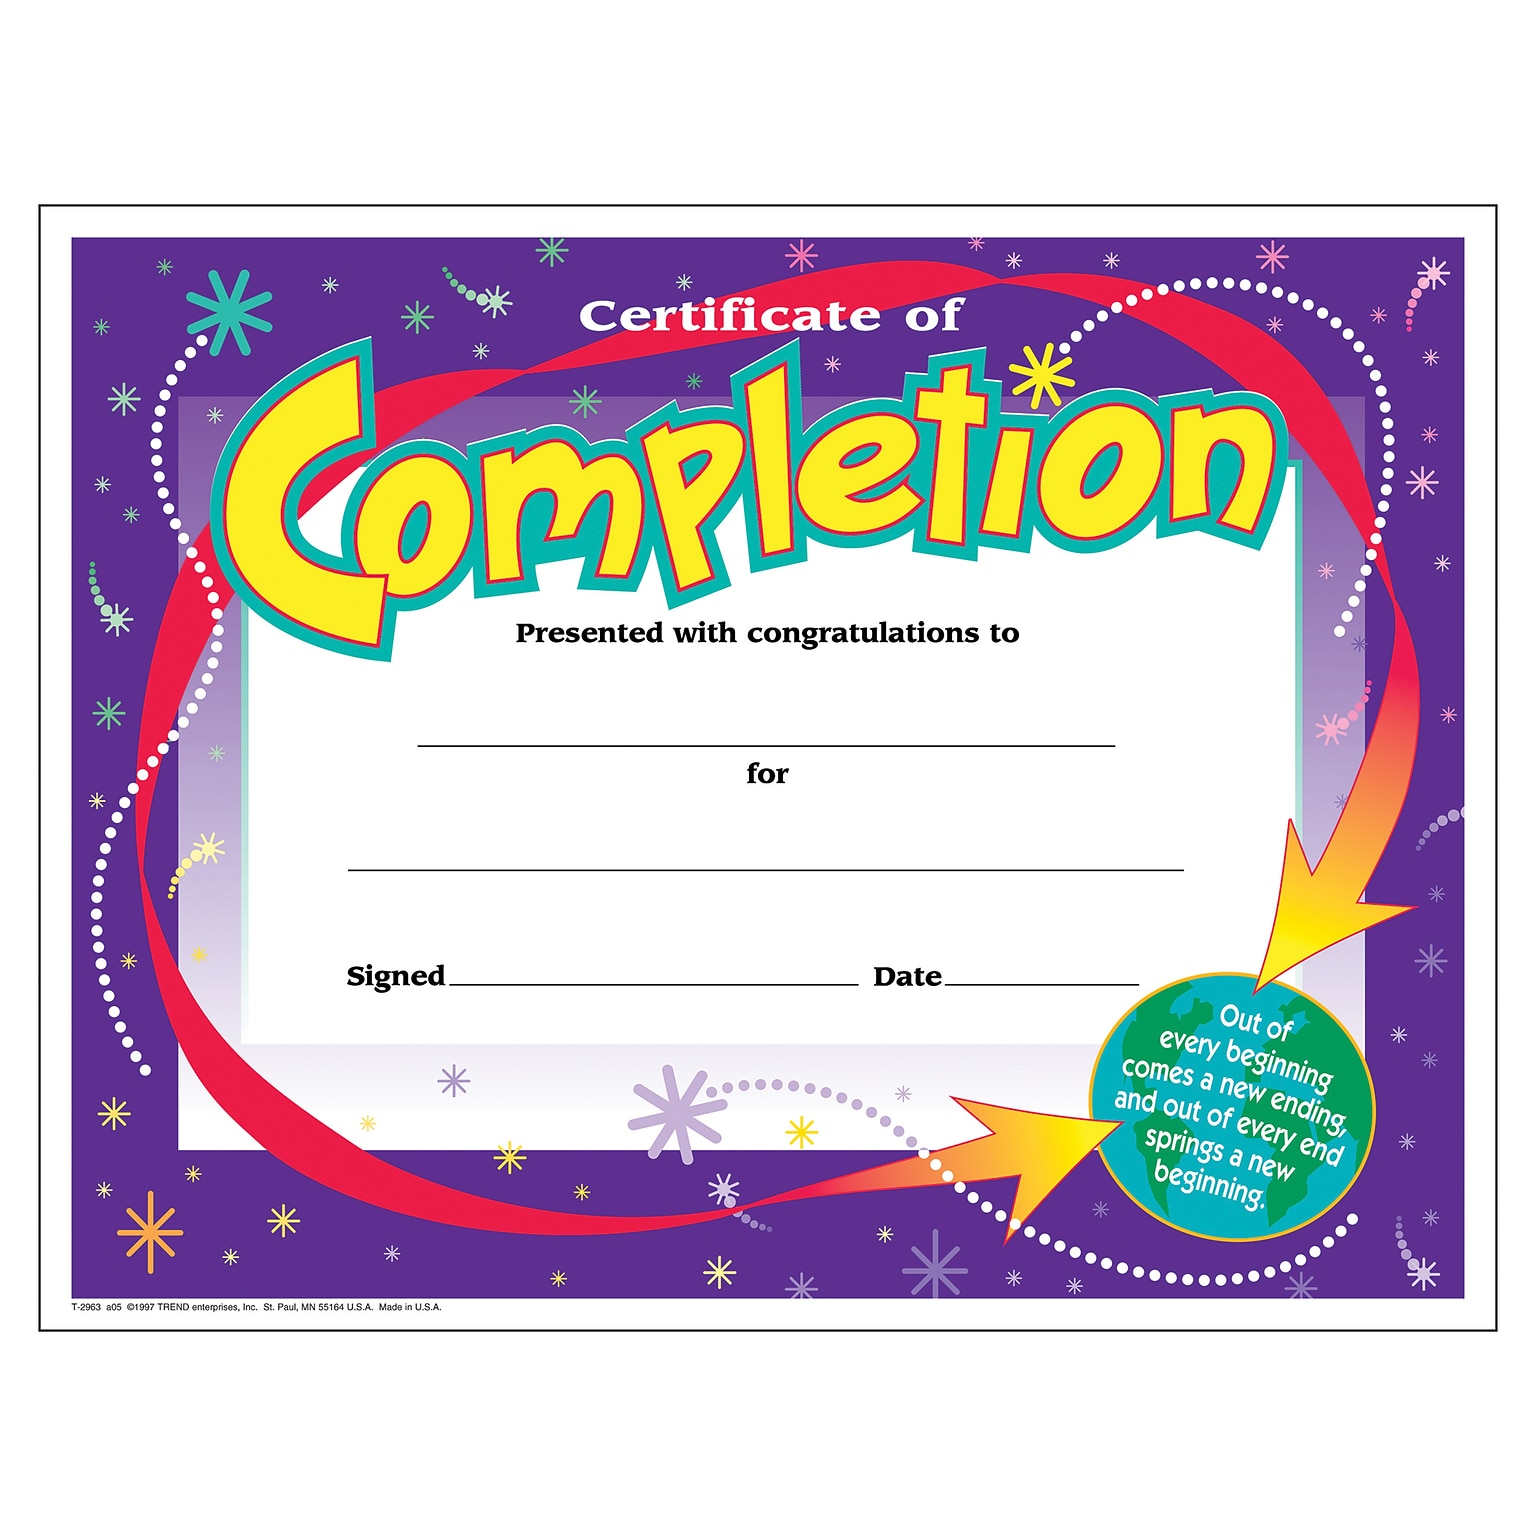 Trend Certificate of Completion Colorful Classics Certs., 30 CT (T-2963)